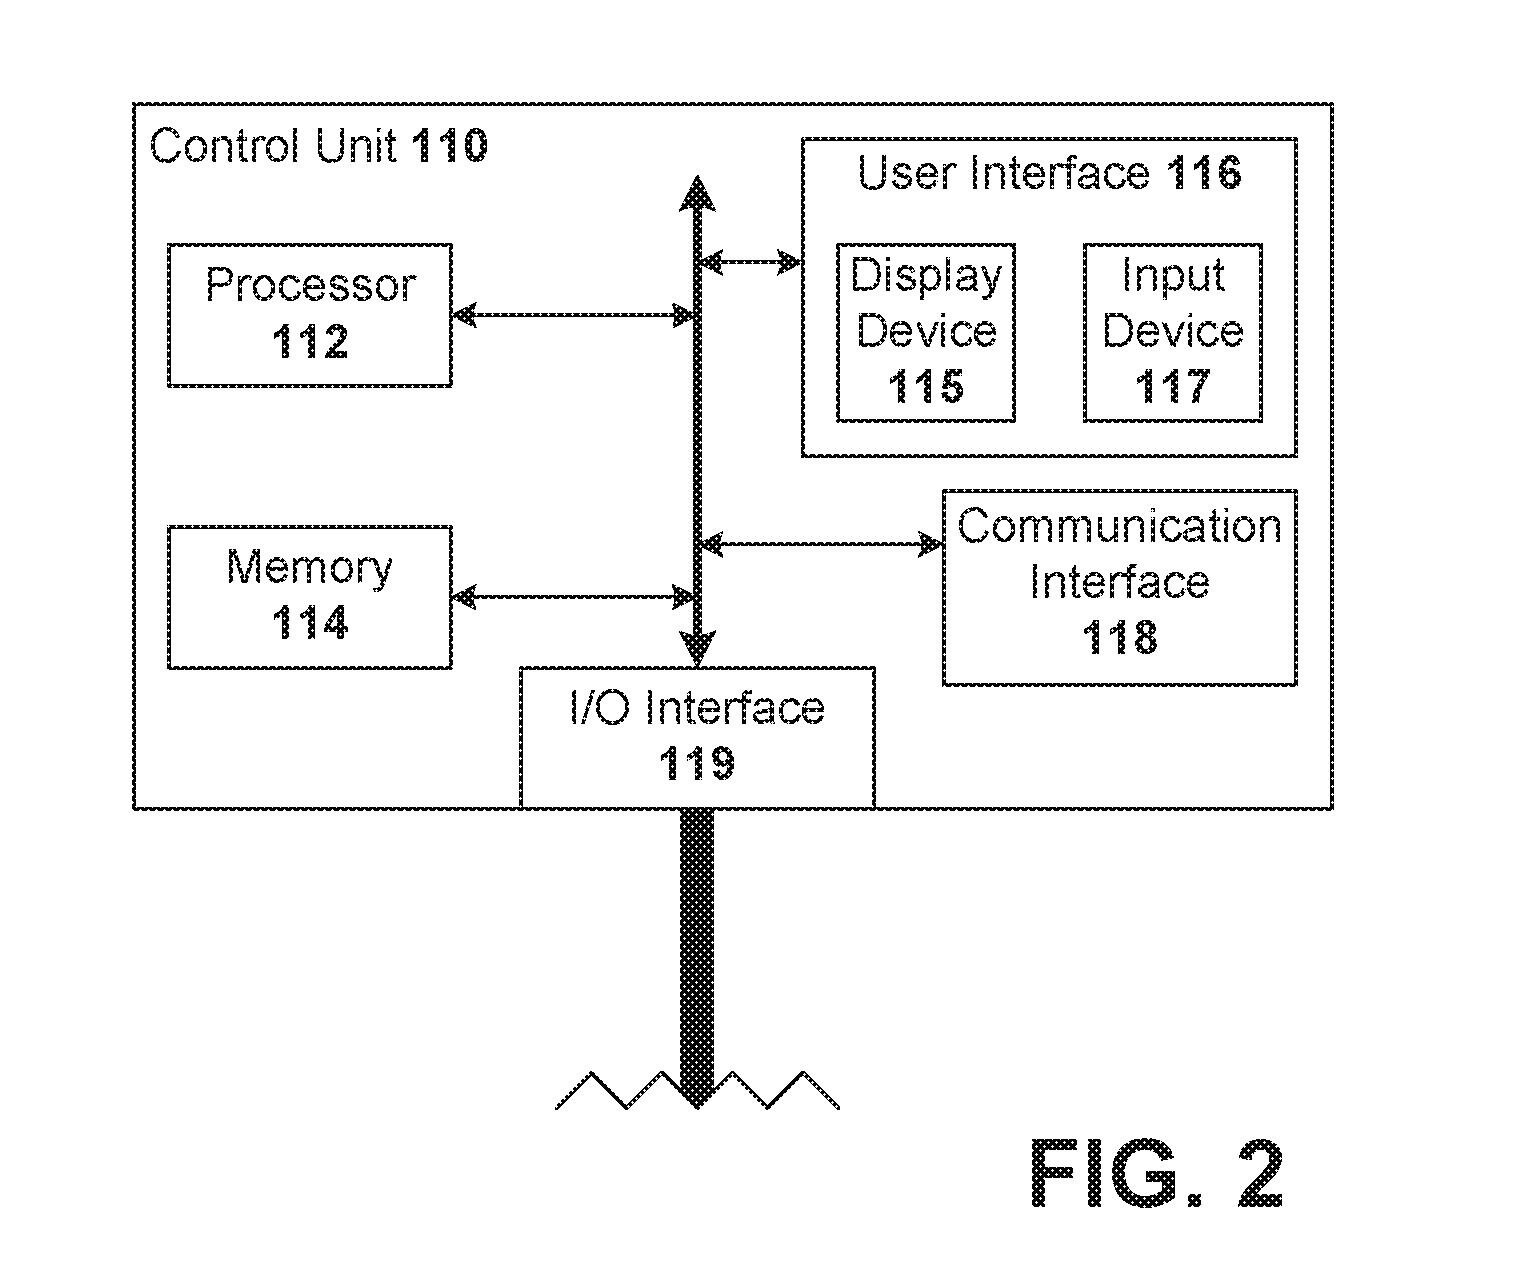 Systems for detecting electrical faults in a vehicle